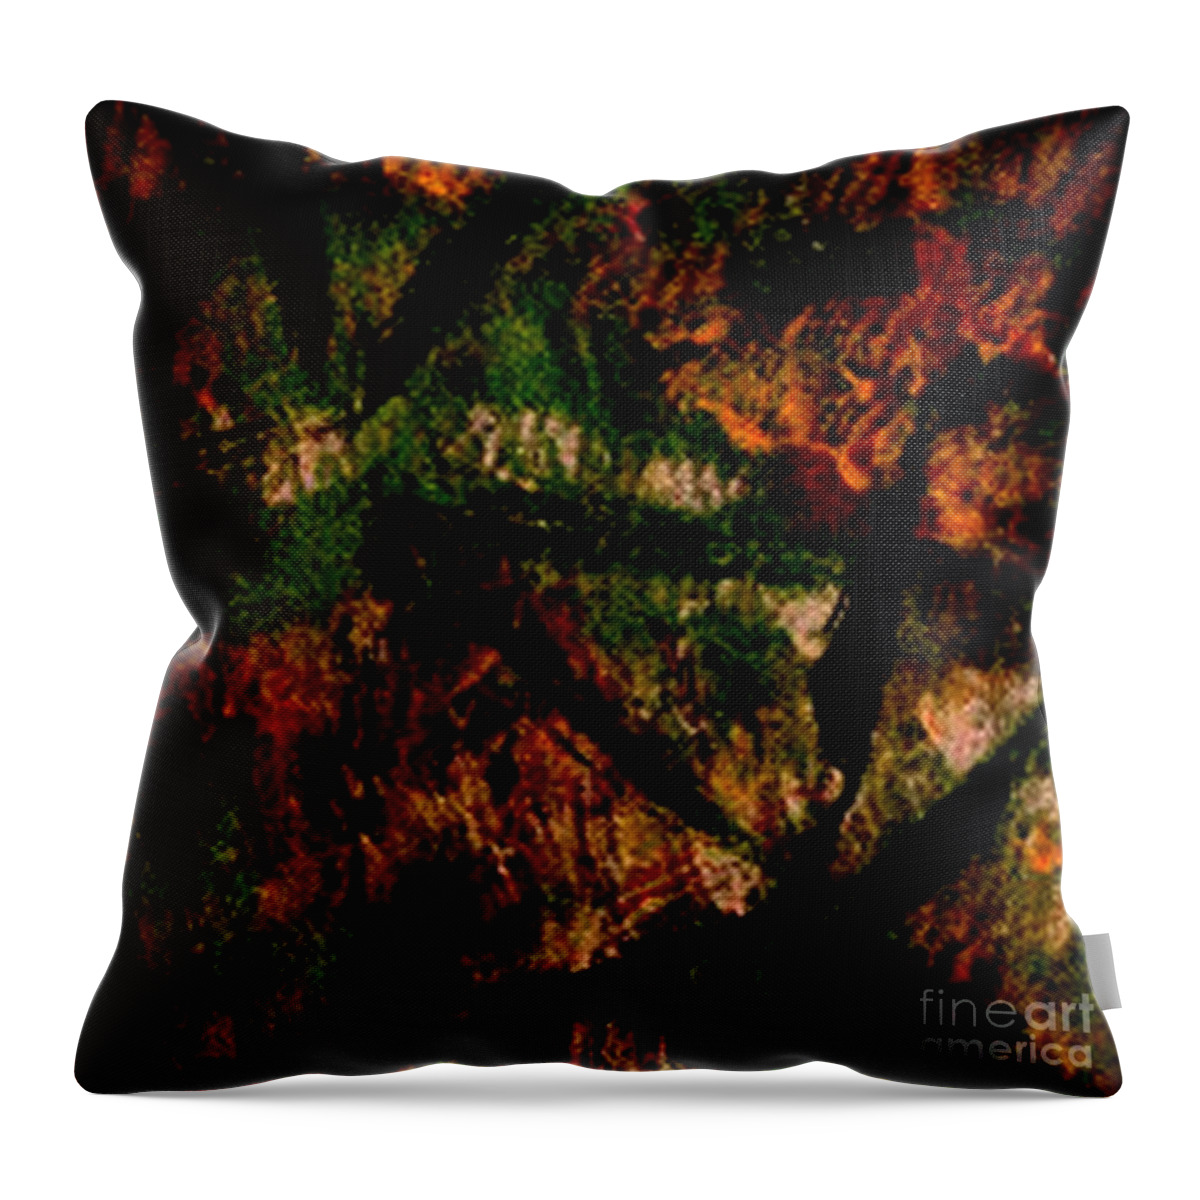 Abstract Colorful Painting Abstract Palm Leaf Effect By Jd Throw Pillow featuring the painting Abstract Palm Leaf by James Daugherty